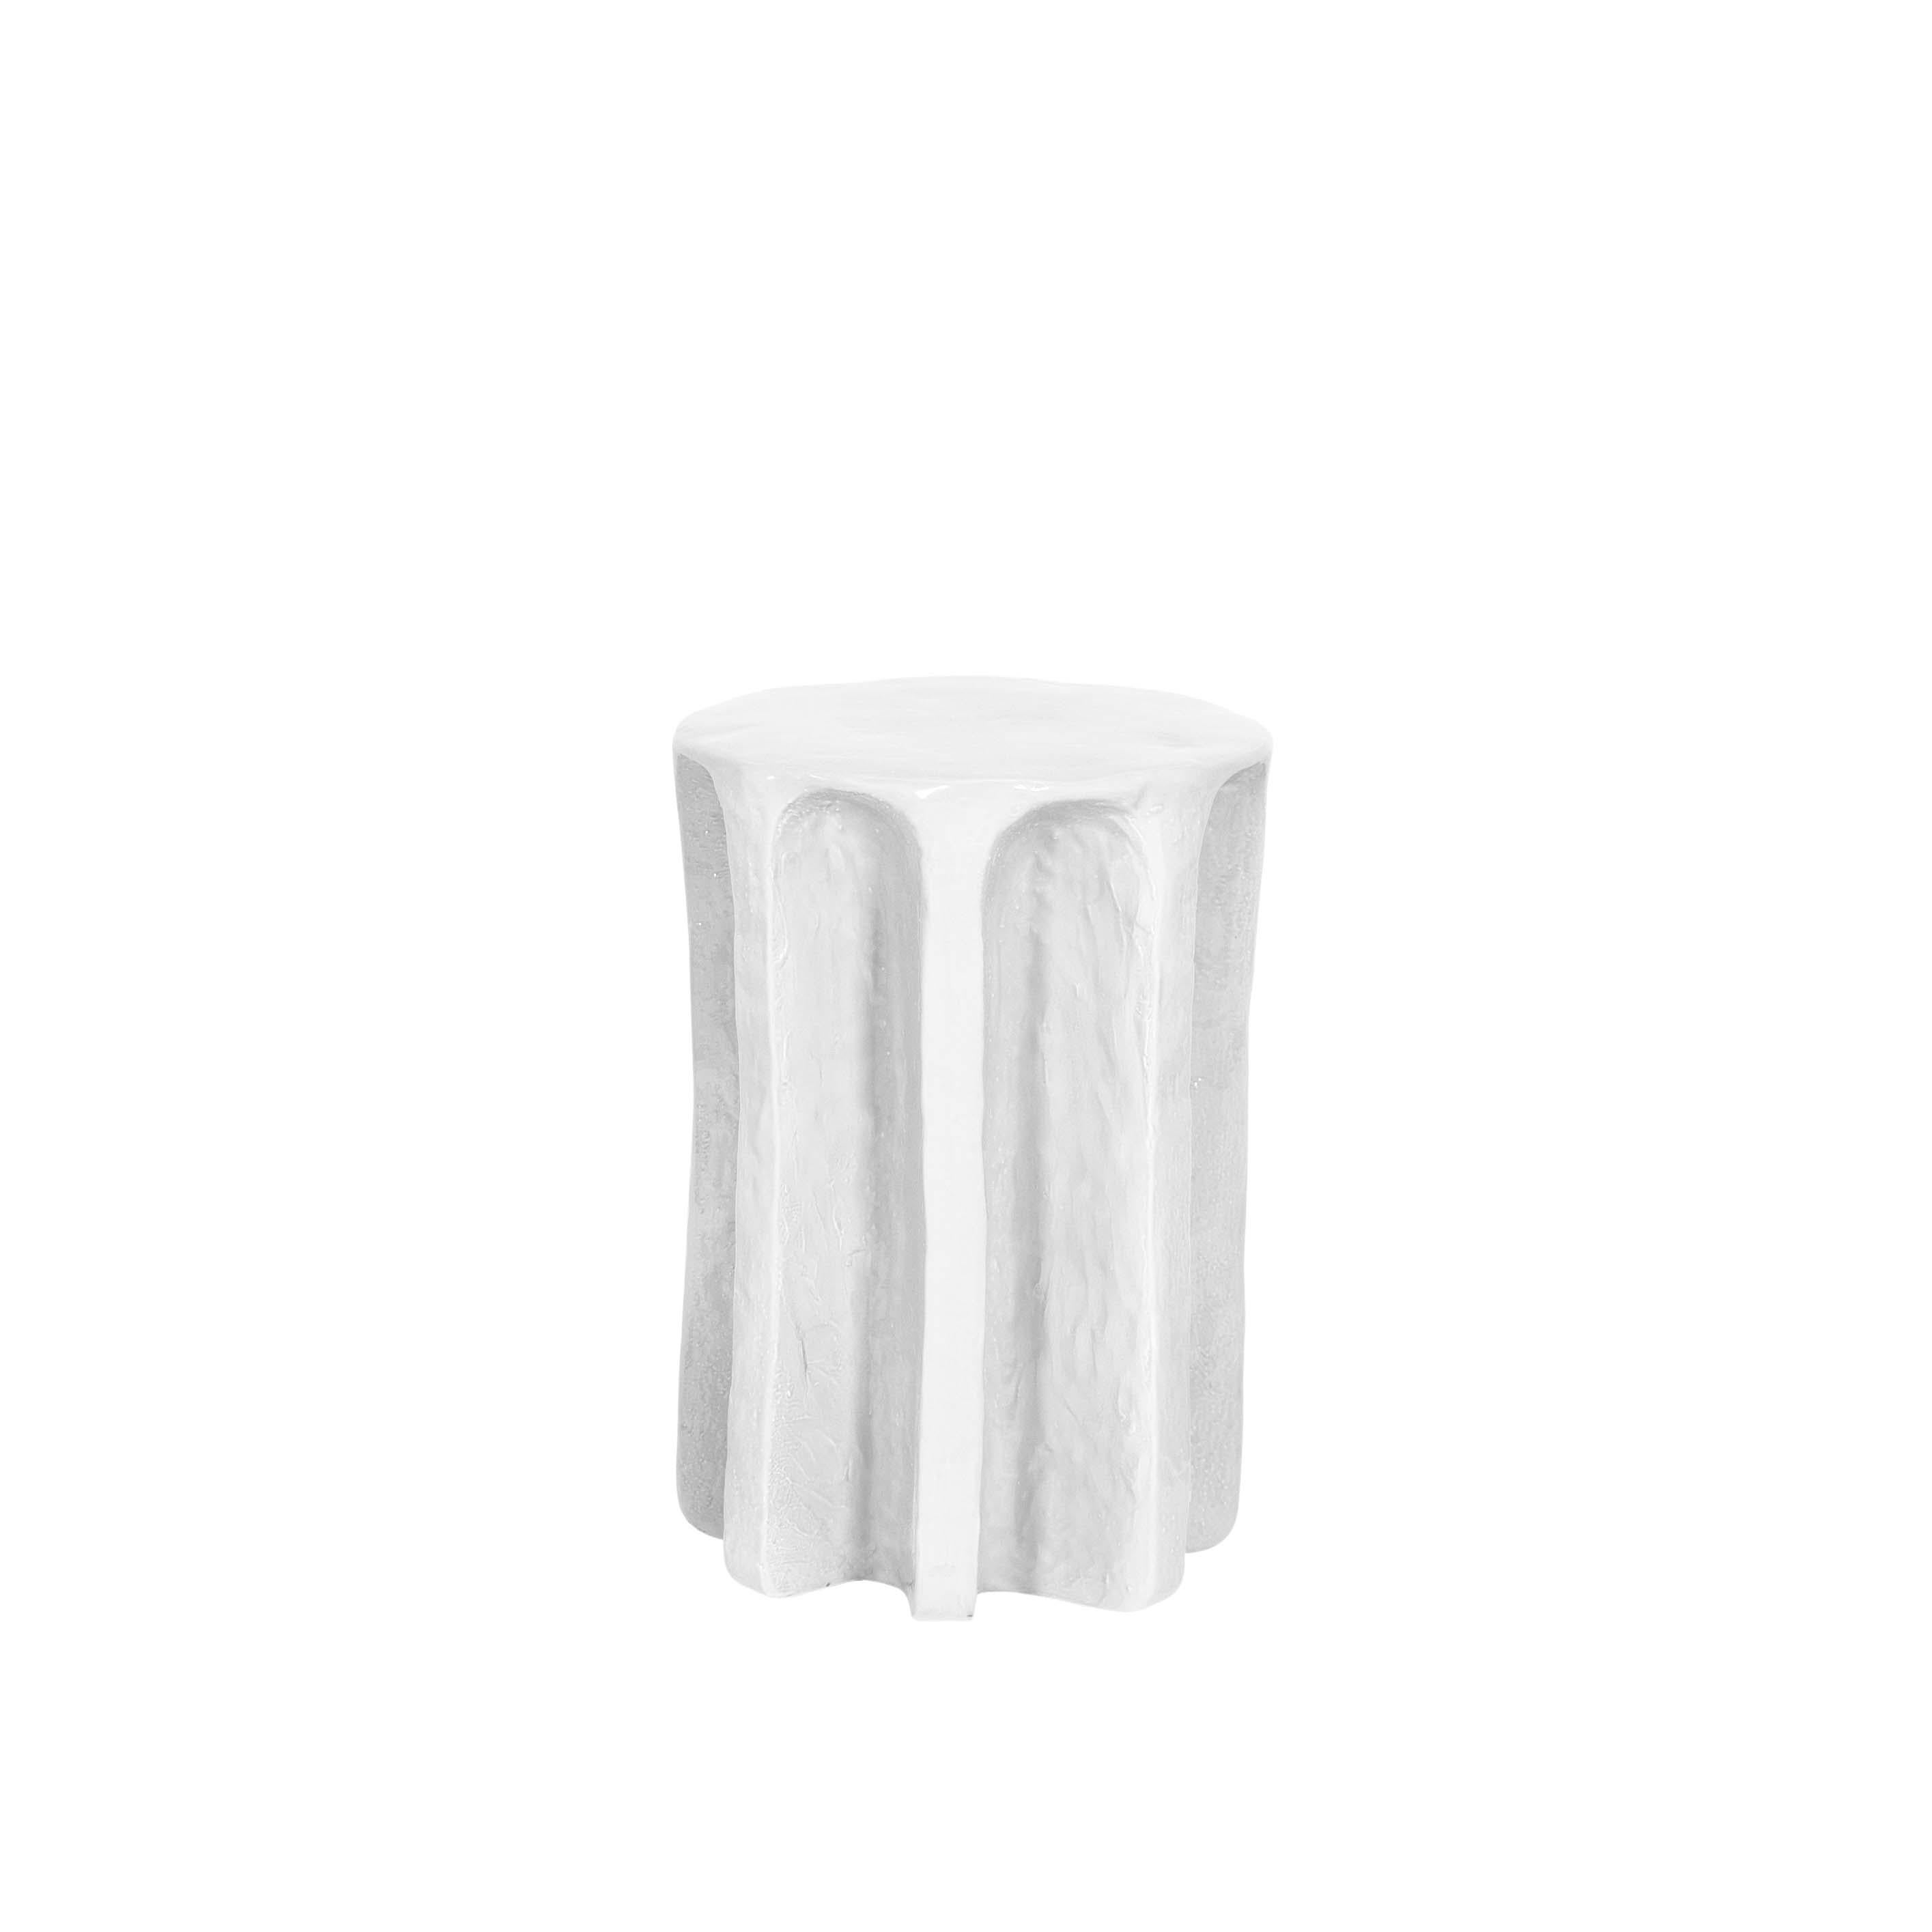 Chouchou high white side table by Pulpo
Dimensions: D 39 x H 57 cm
Materials: ceramic

Also available in different Colours.

Chouchou bears the contours of an antique column – which, knowing designer Lorenzo Zanovello’s, is most likely a